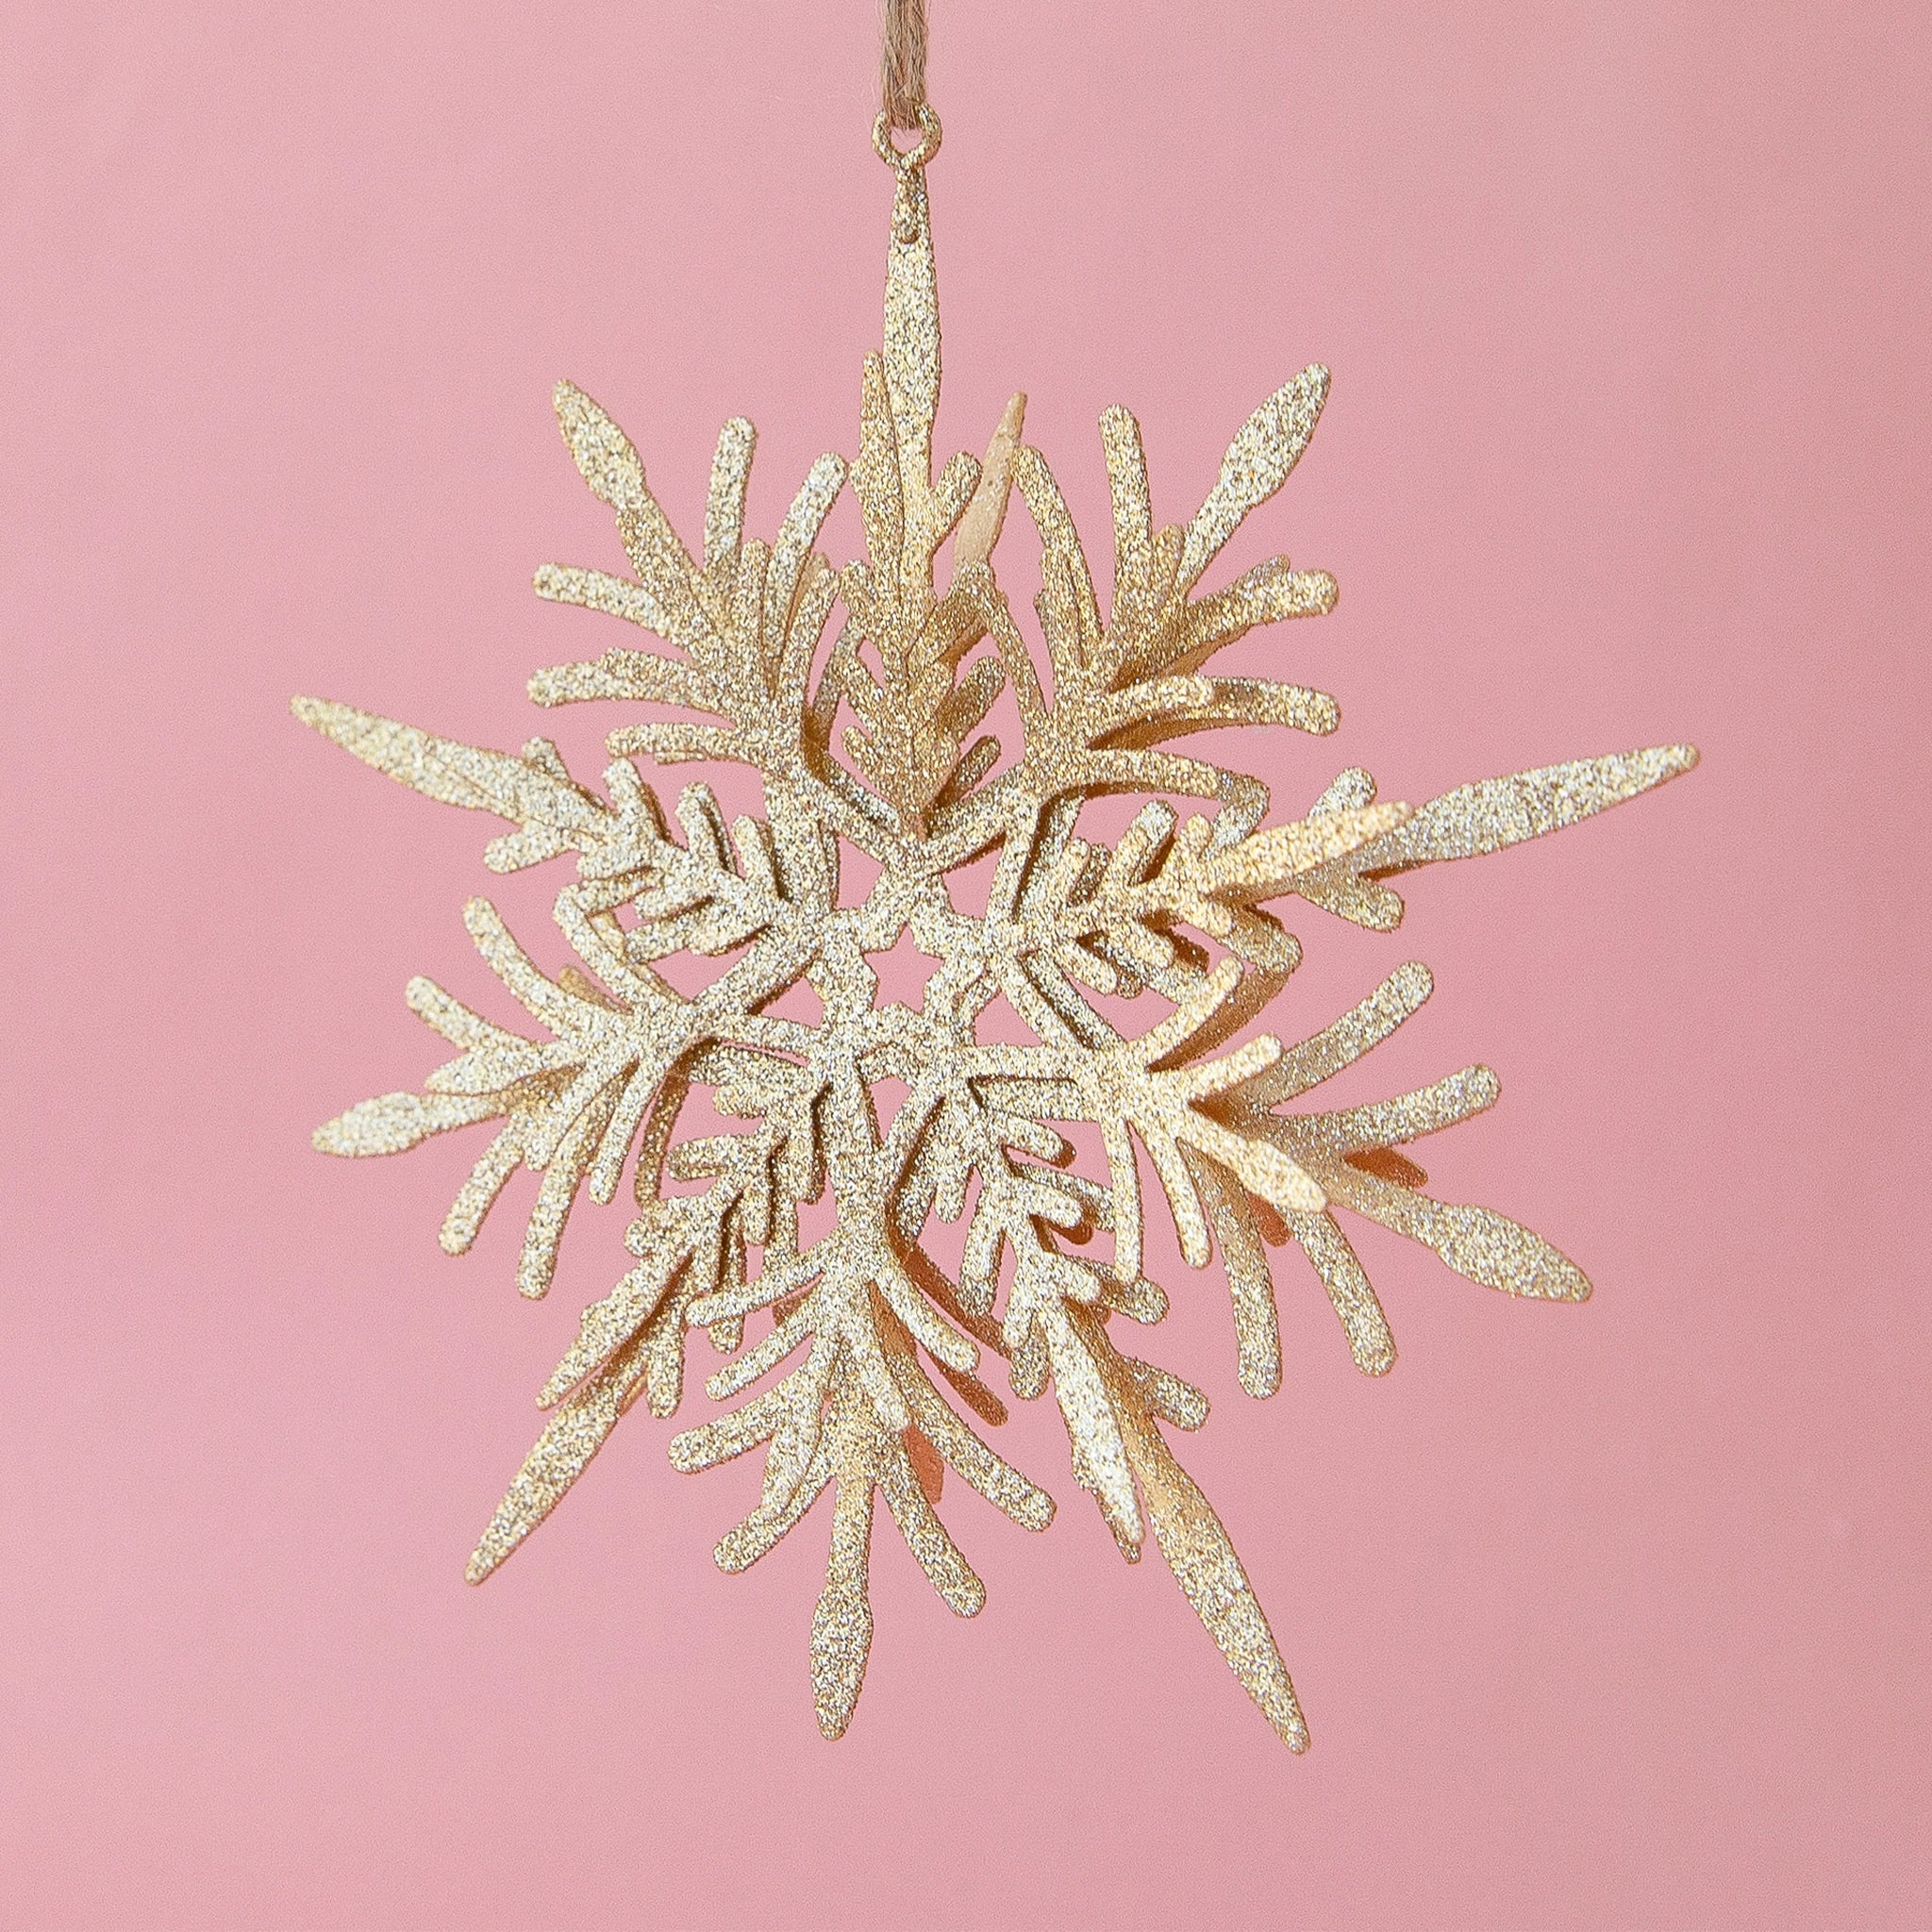 On a pink background is a gold glitter snowflake ornament.